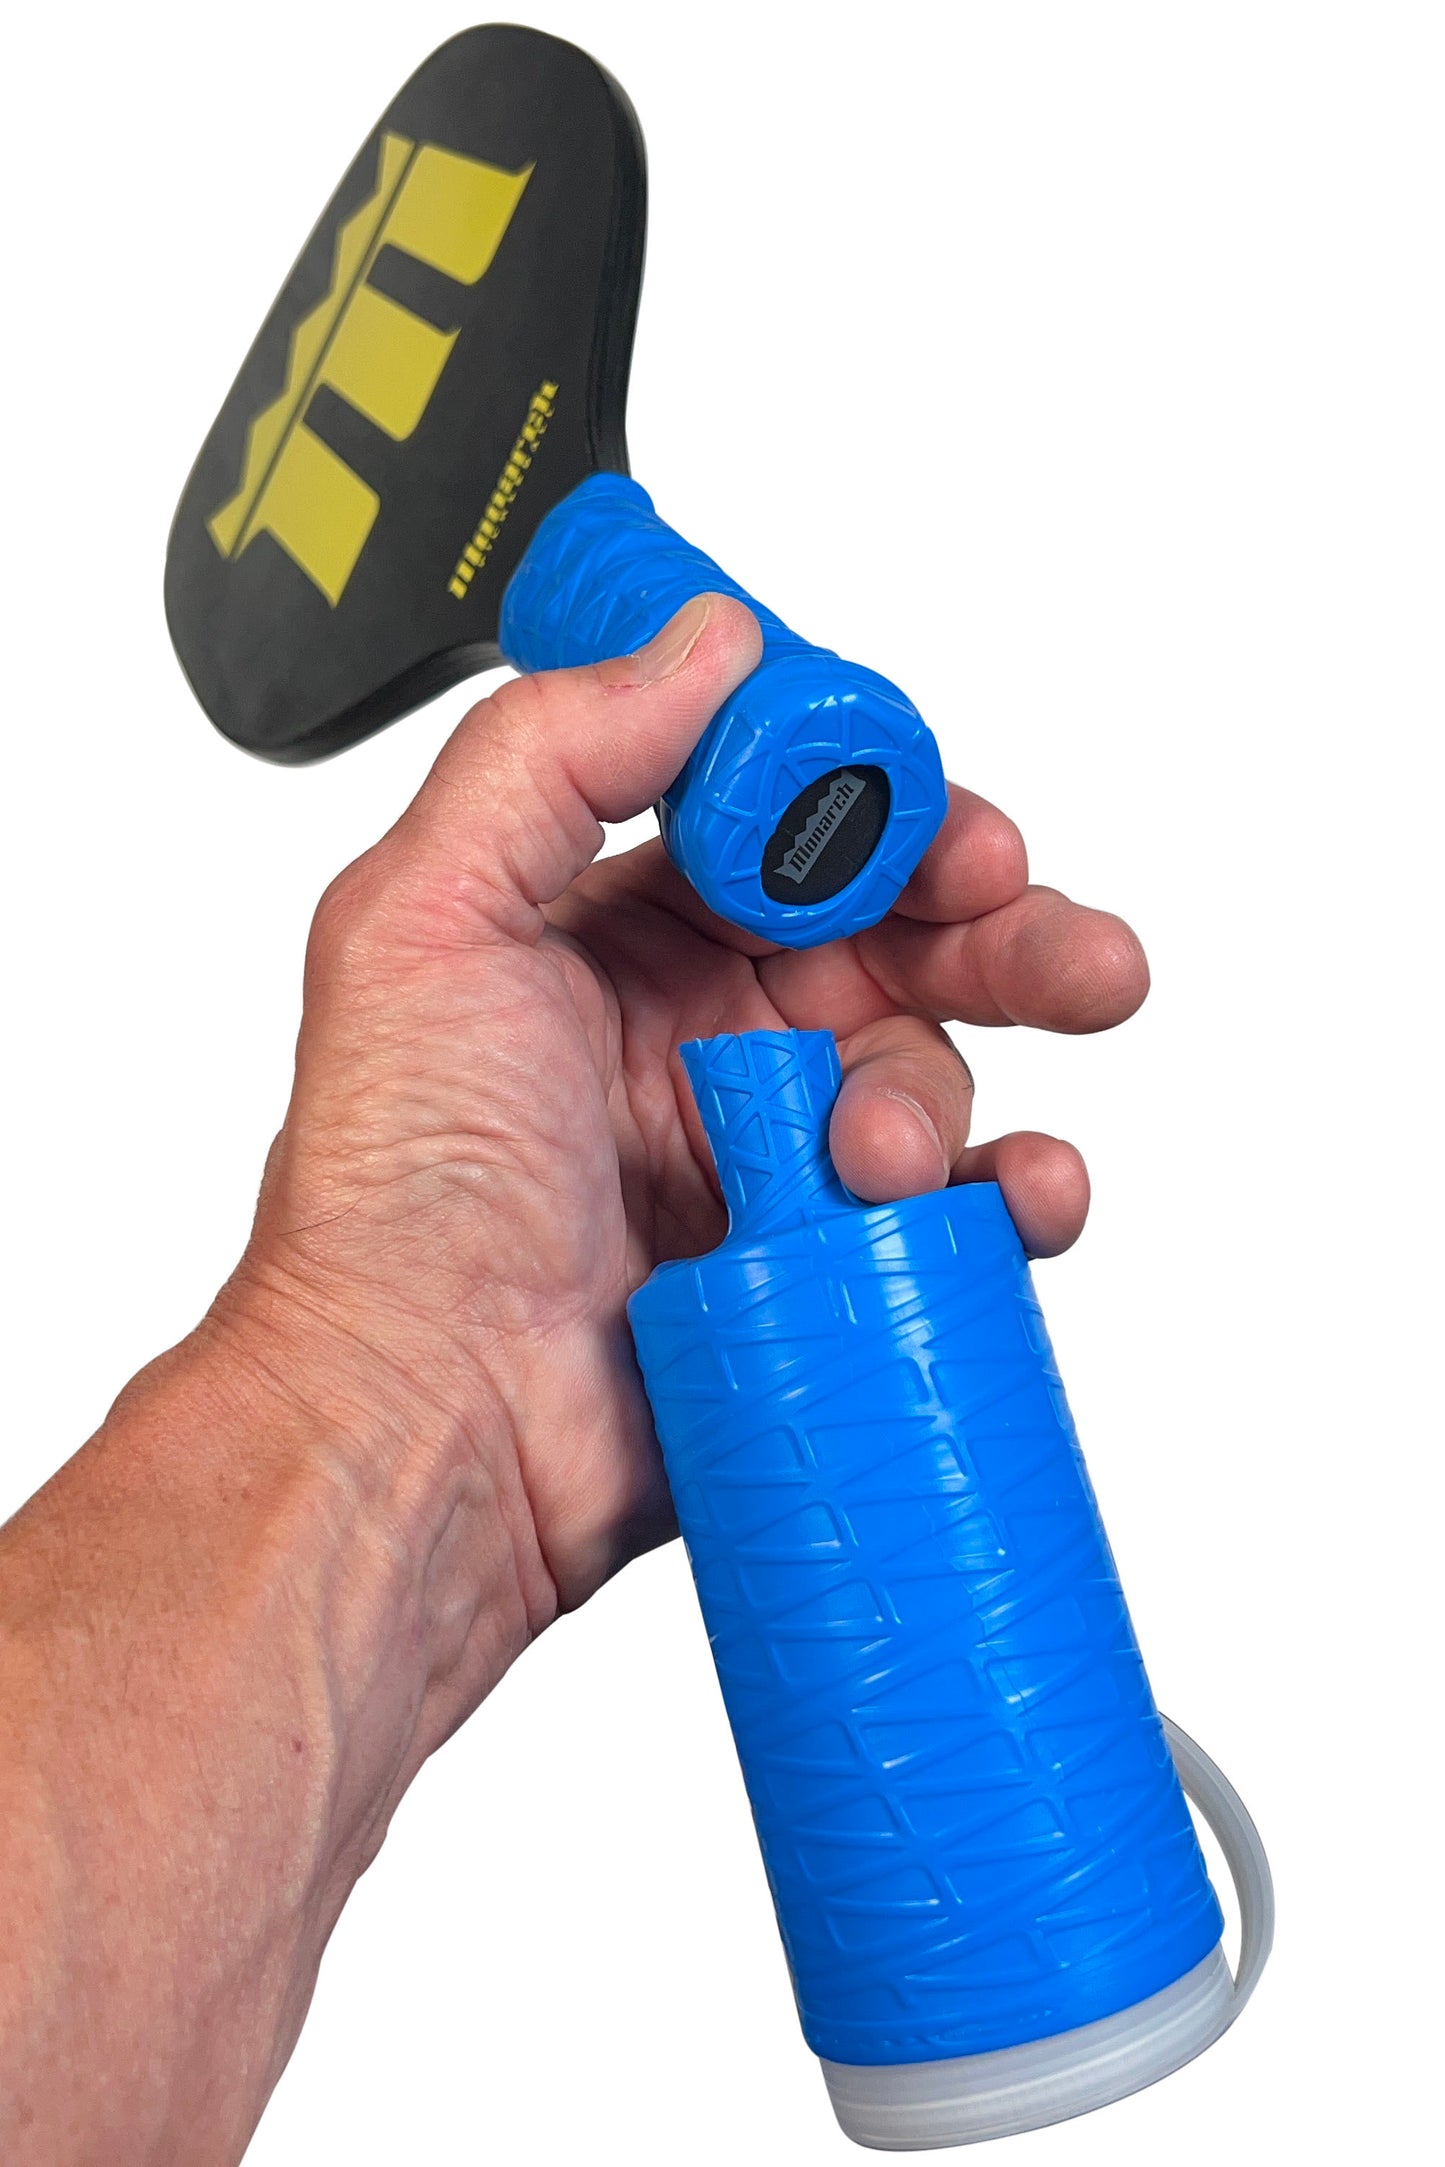 The Stick Grip for all stick sports uses universally accepted one